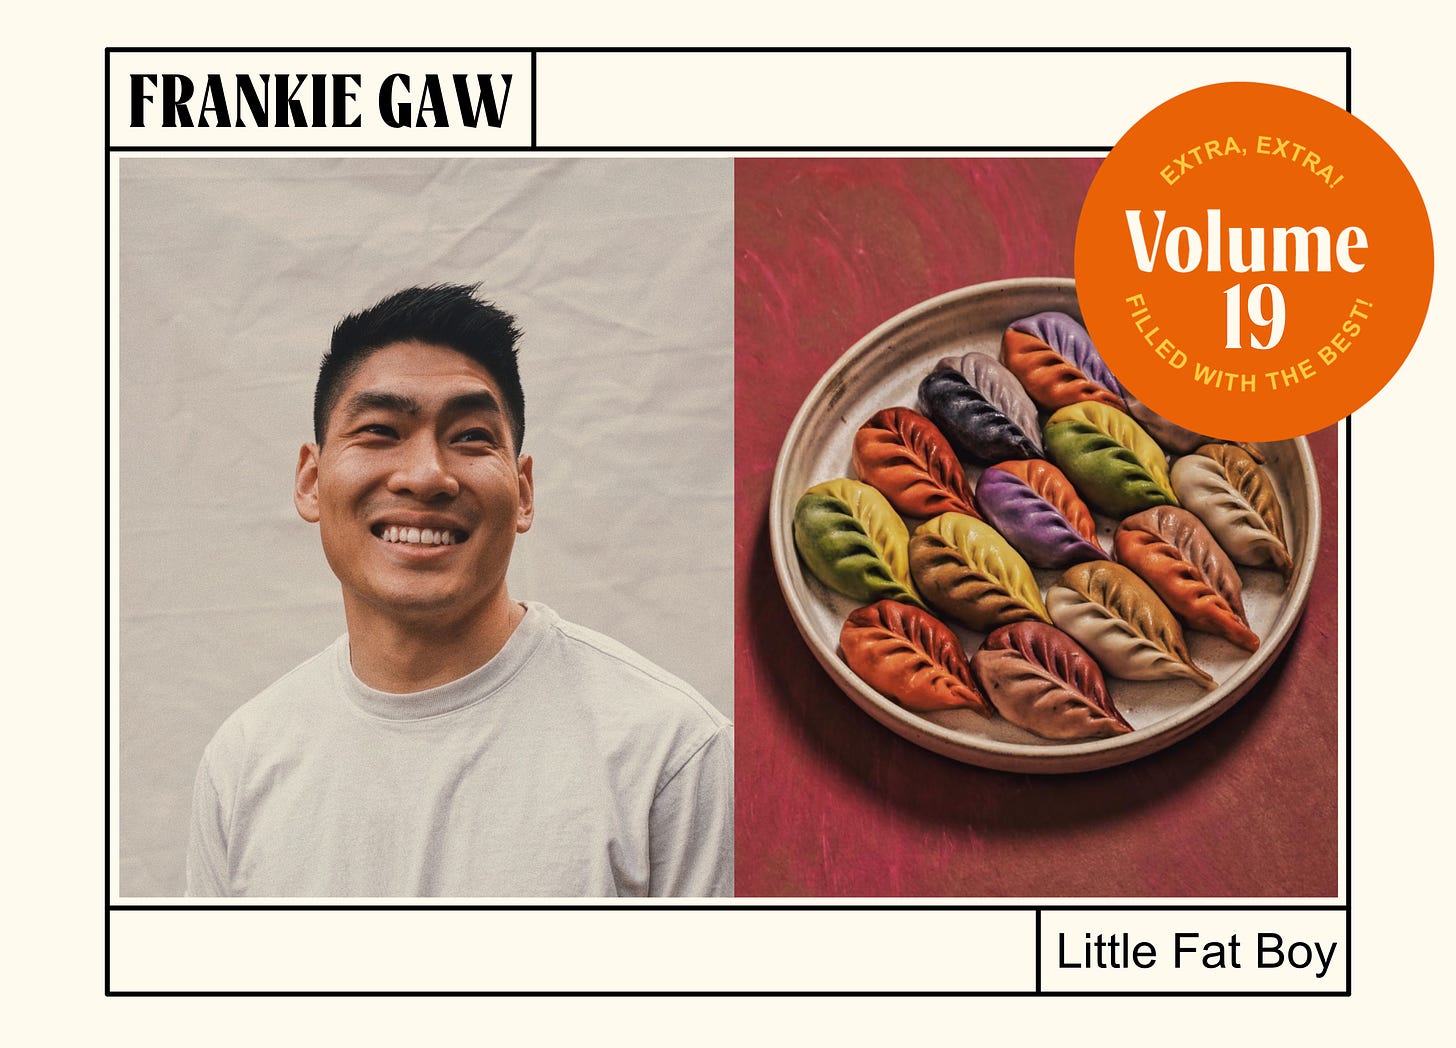 At left is a photo of Frankie Gaw against a tan background; at right is a platter of his homemade braided dumplings in a variety of two-toned shades